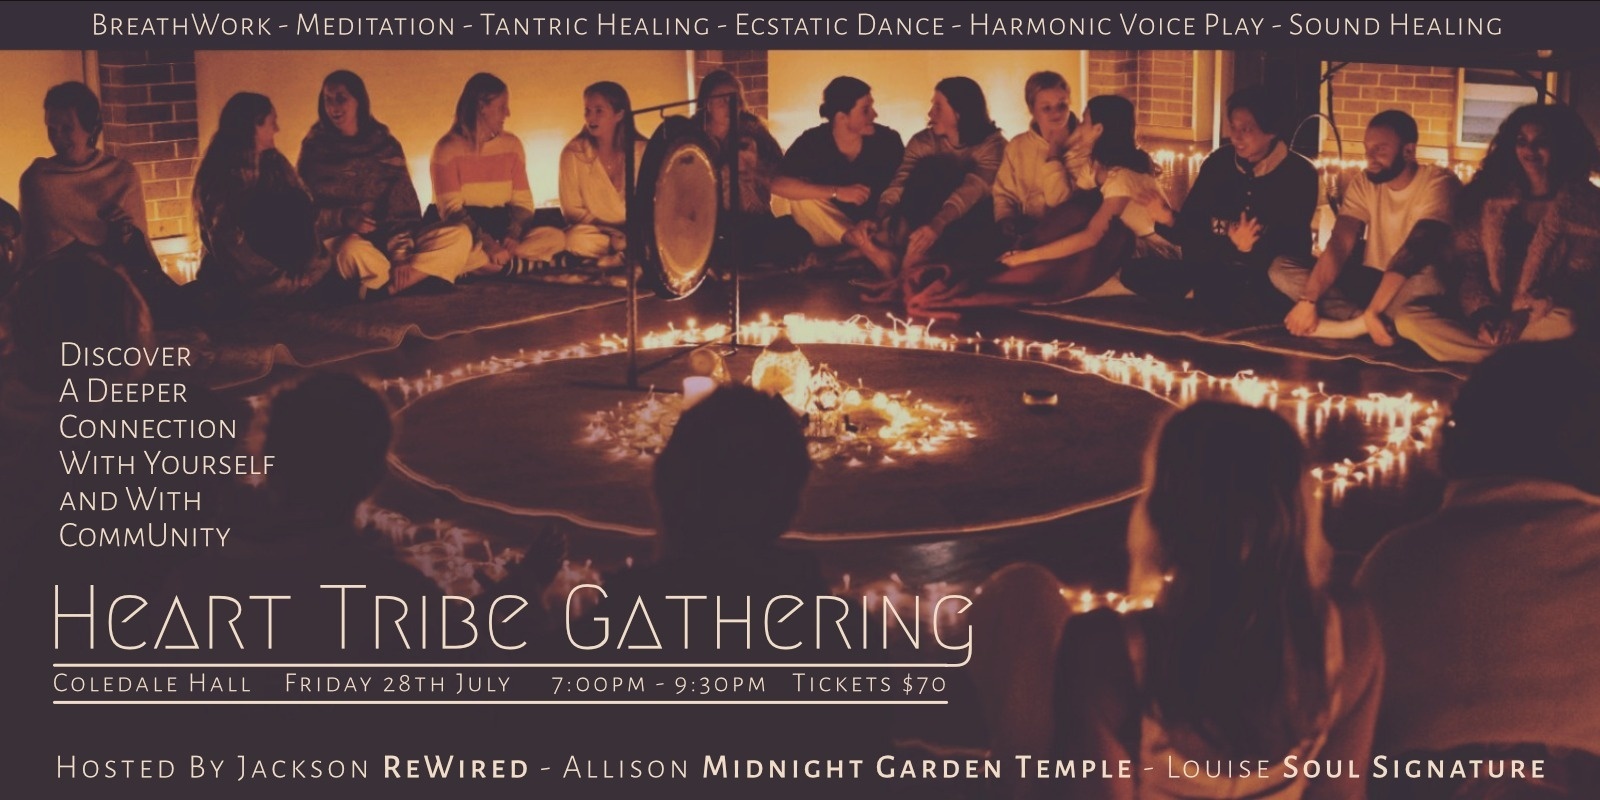 Banner image for Heart Tribe Gathering - Breath, Sound & Dance